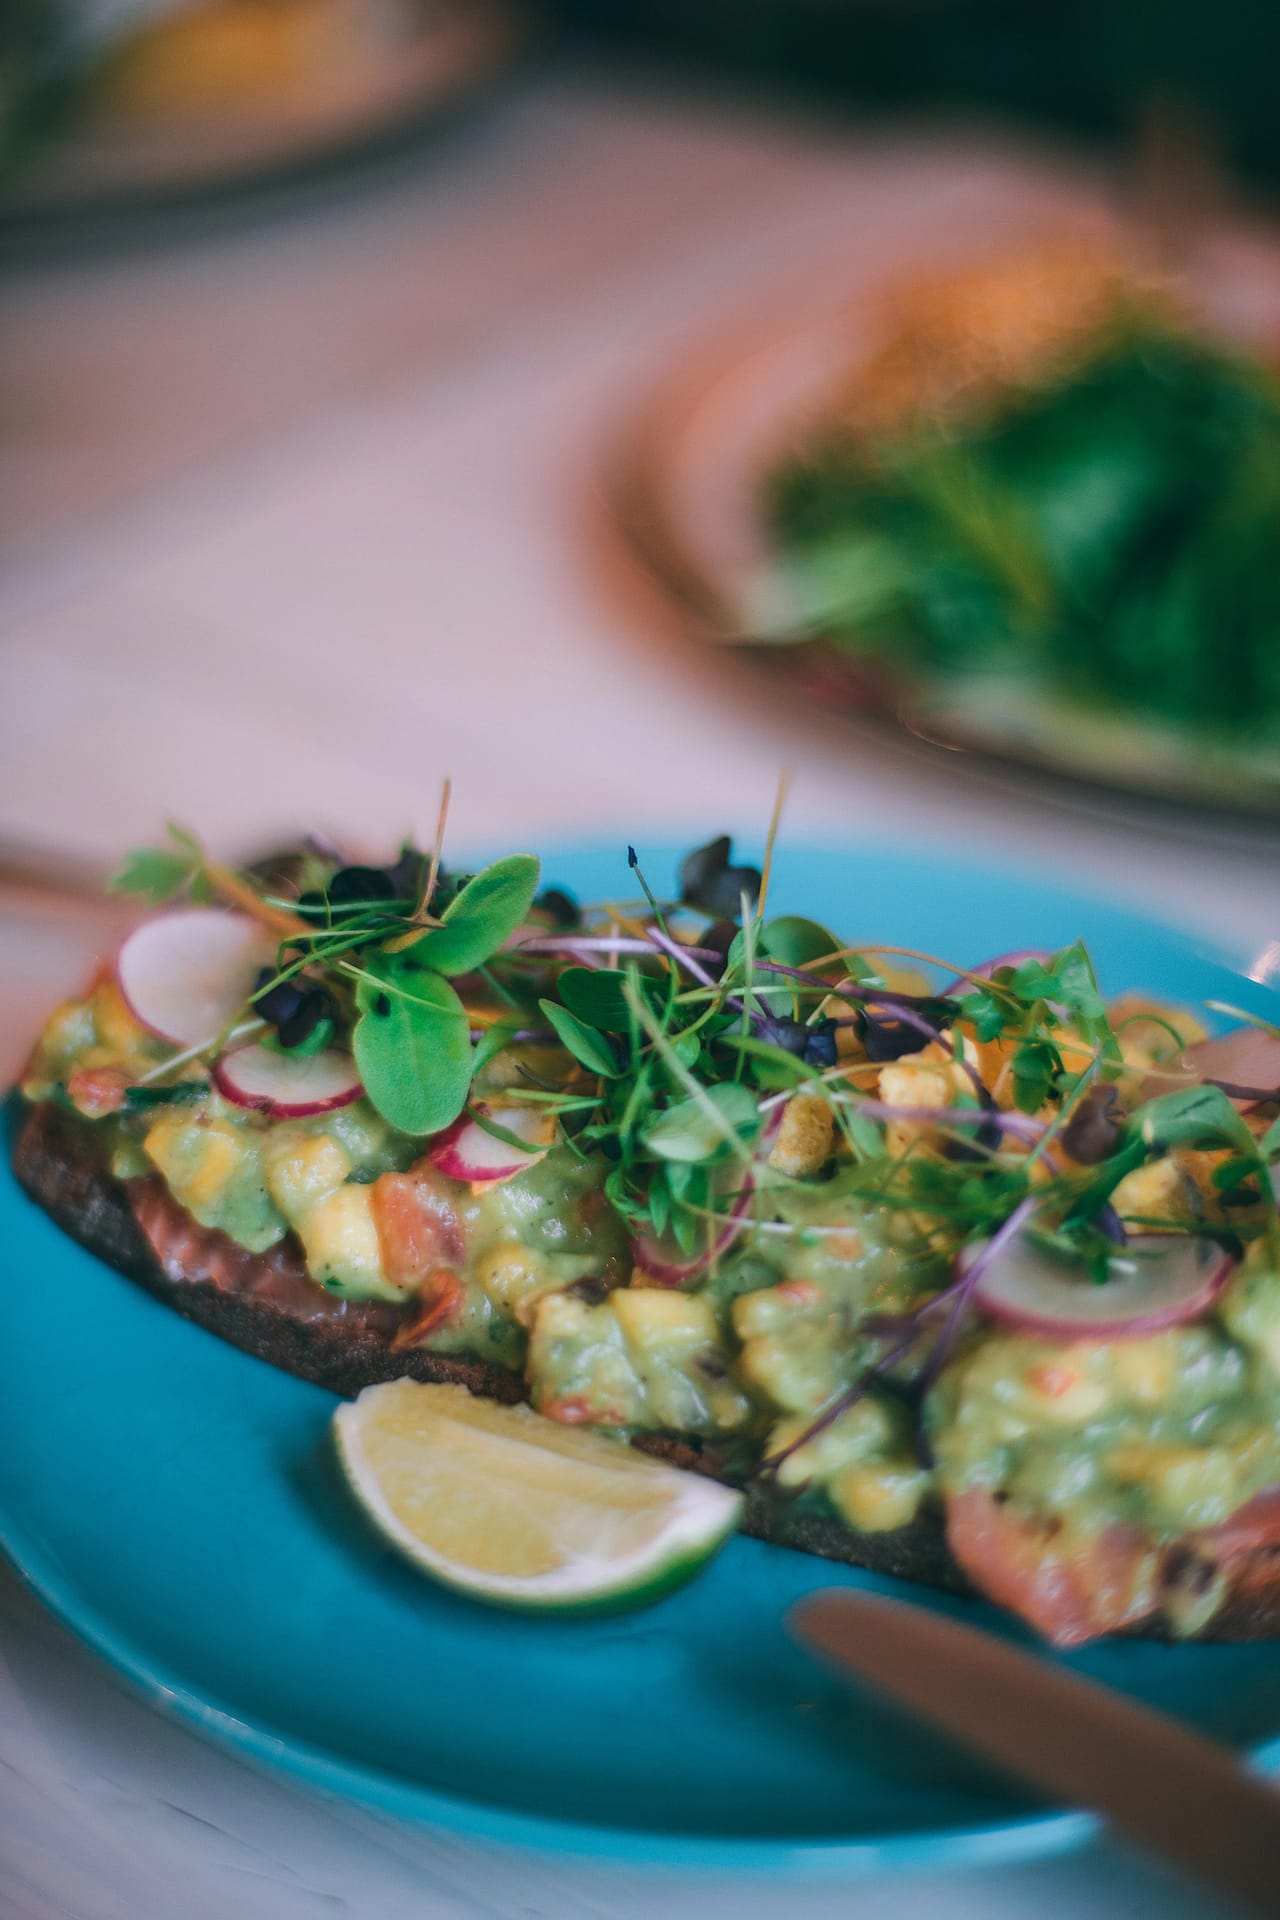 Microgreen Mix Delight on top of bread, resembles pizza